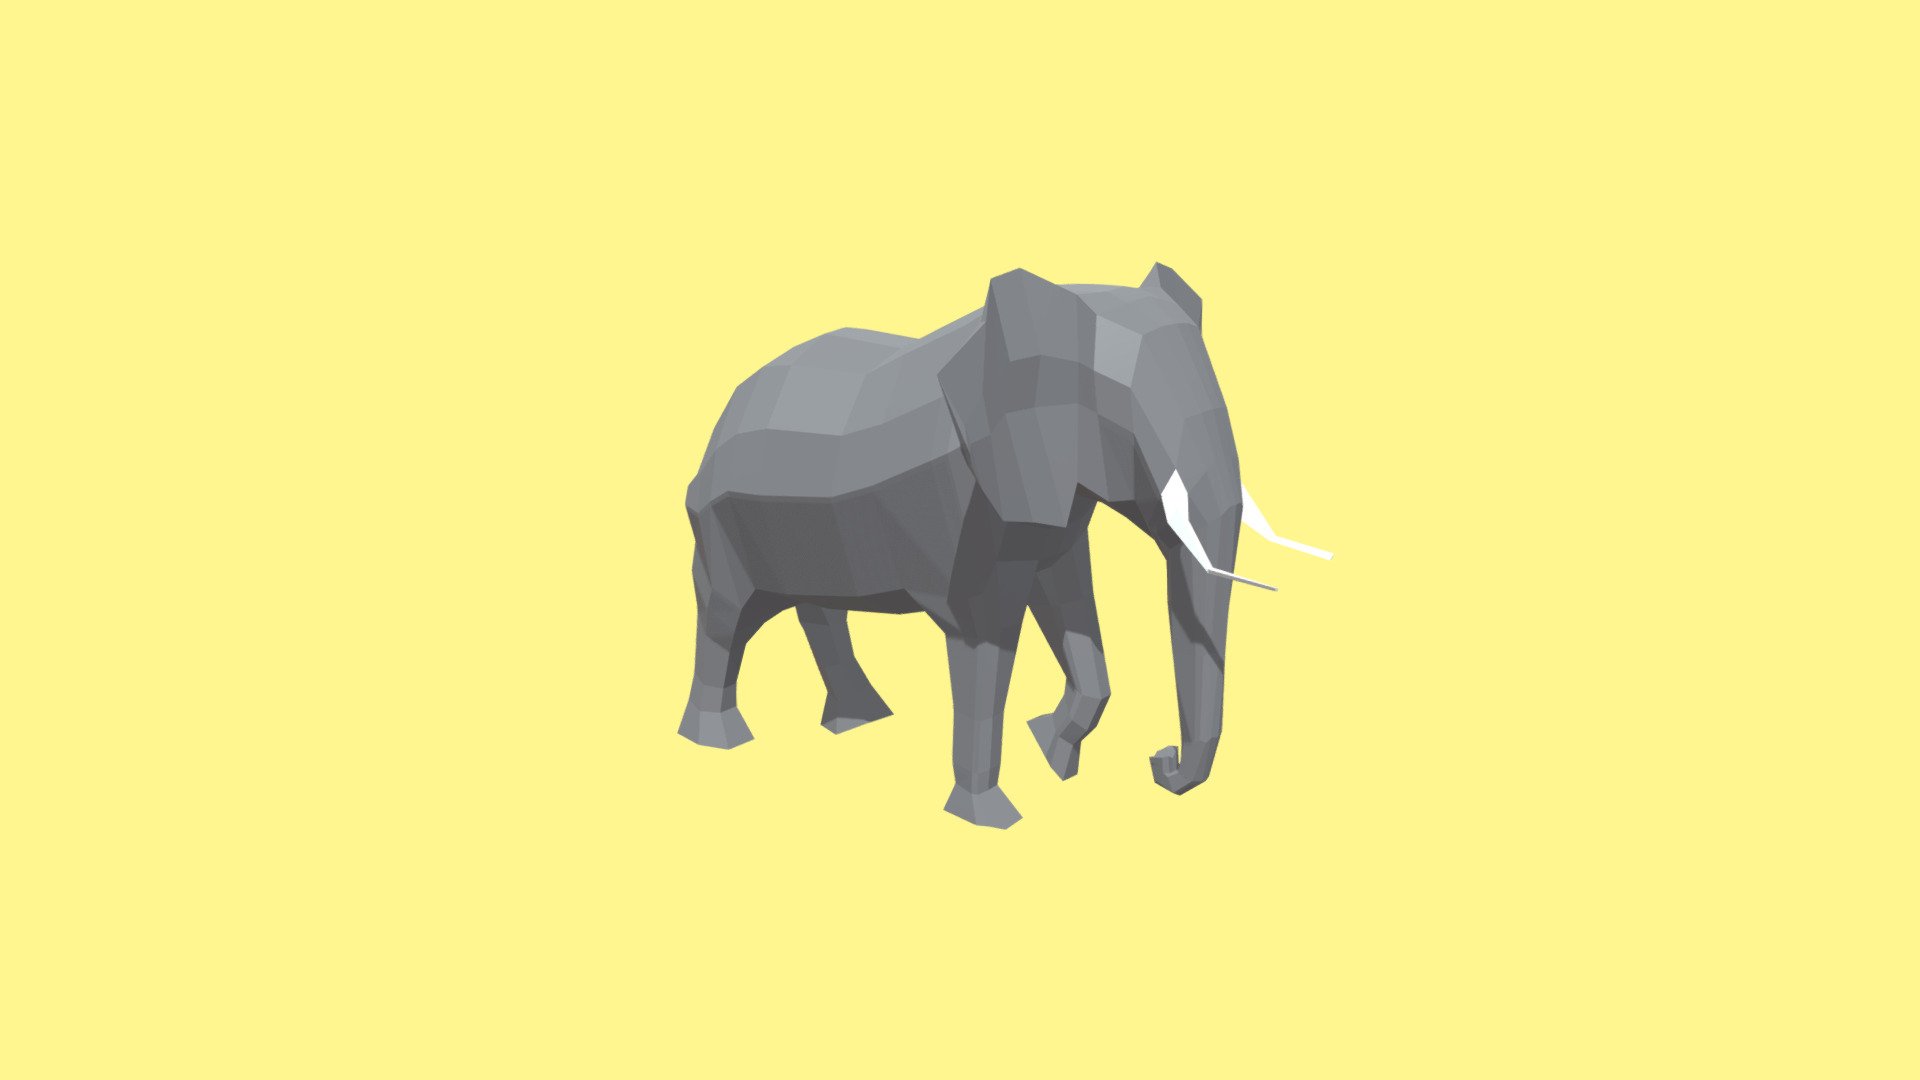 A low poly elephant, made in blender - Low poly elephant - Download Free 3D model by MrEliptik 3d model